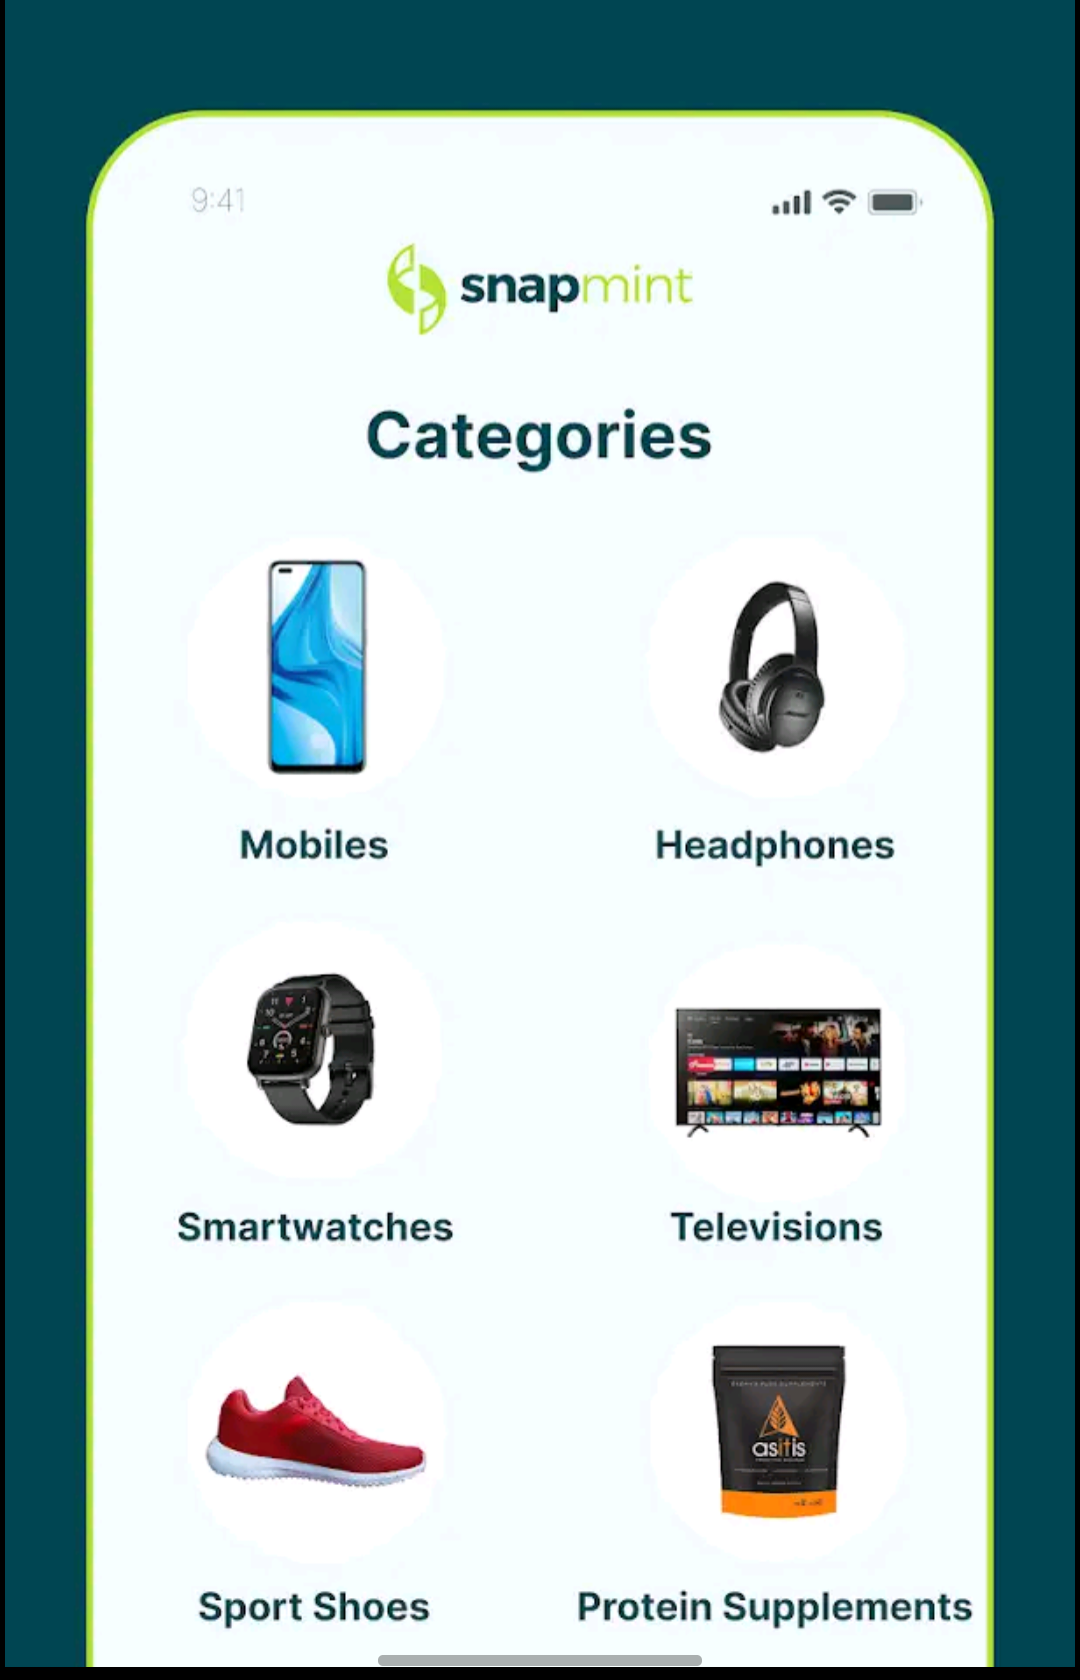 snapmint paylater services via categories